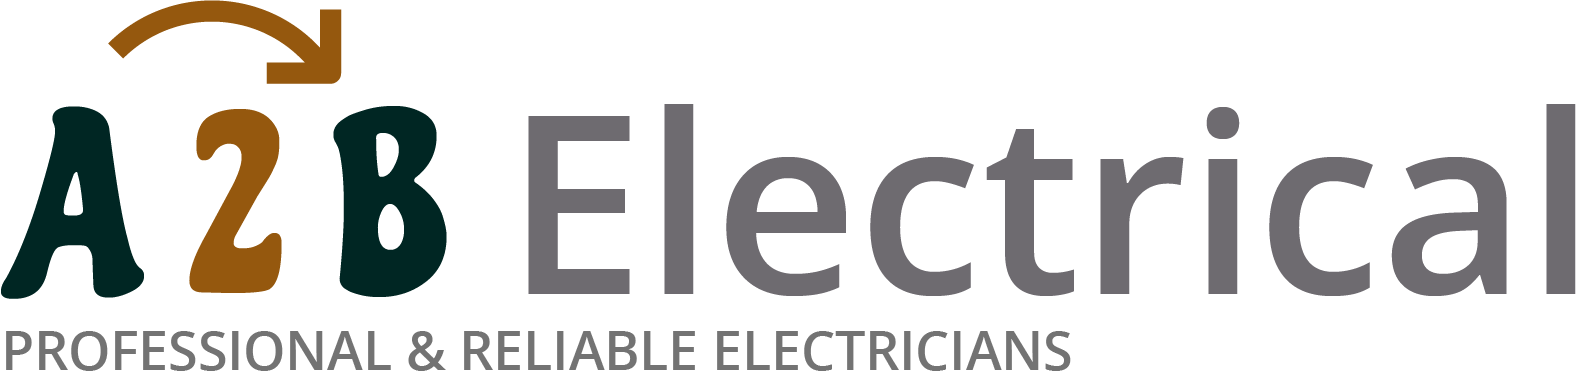 If you have electrical wiring problems in Sherborne, we can provide an electrician to have a look for you. 